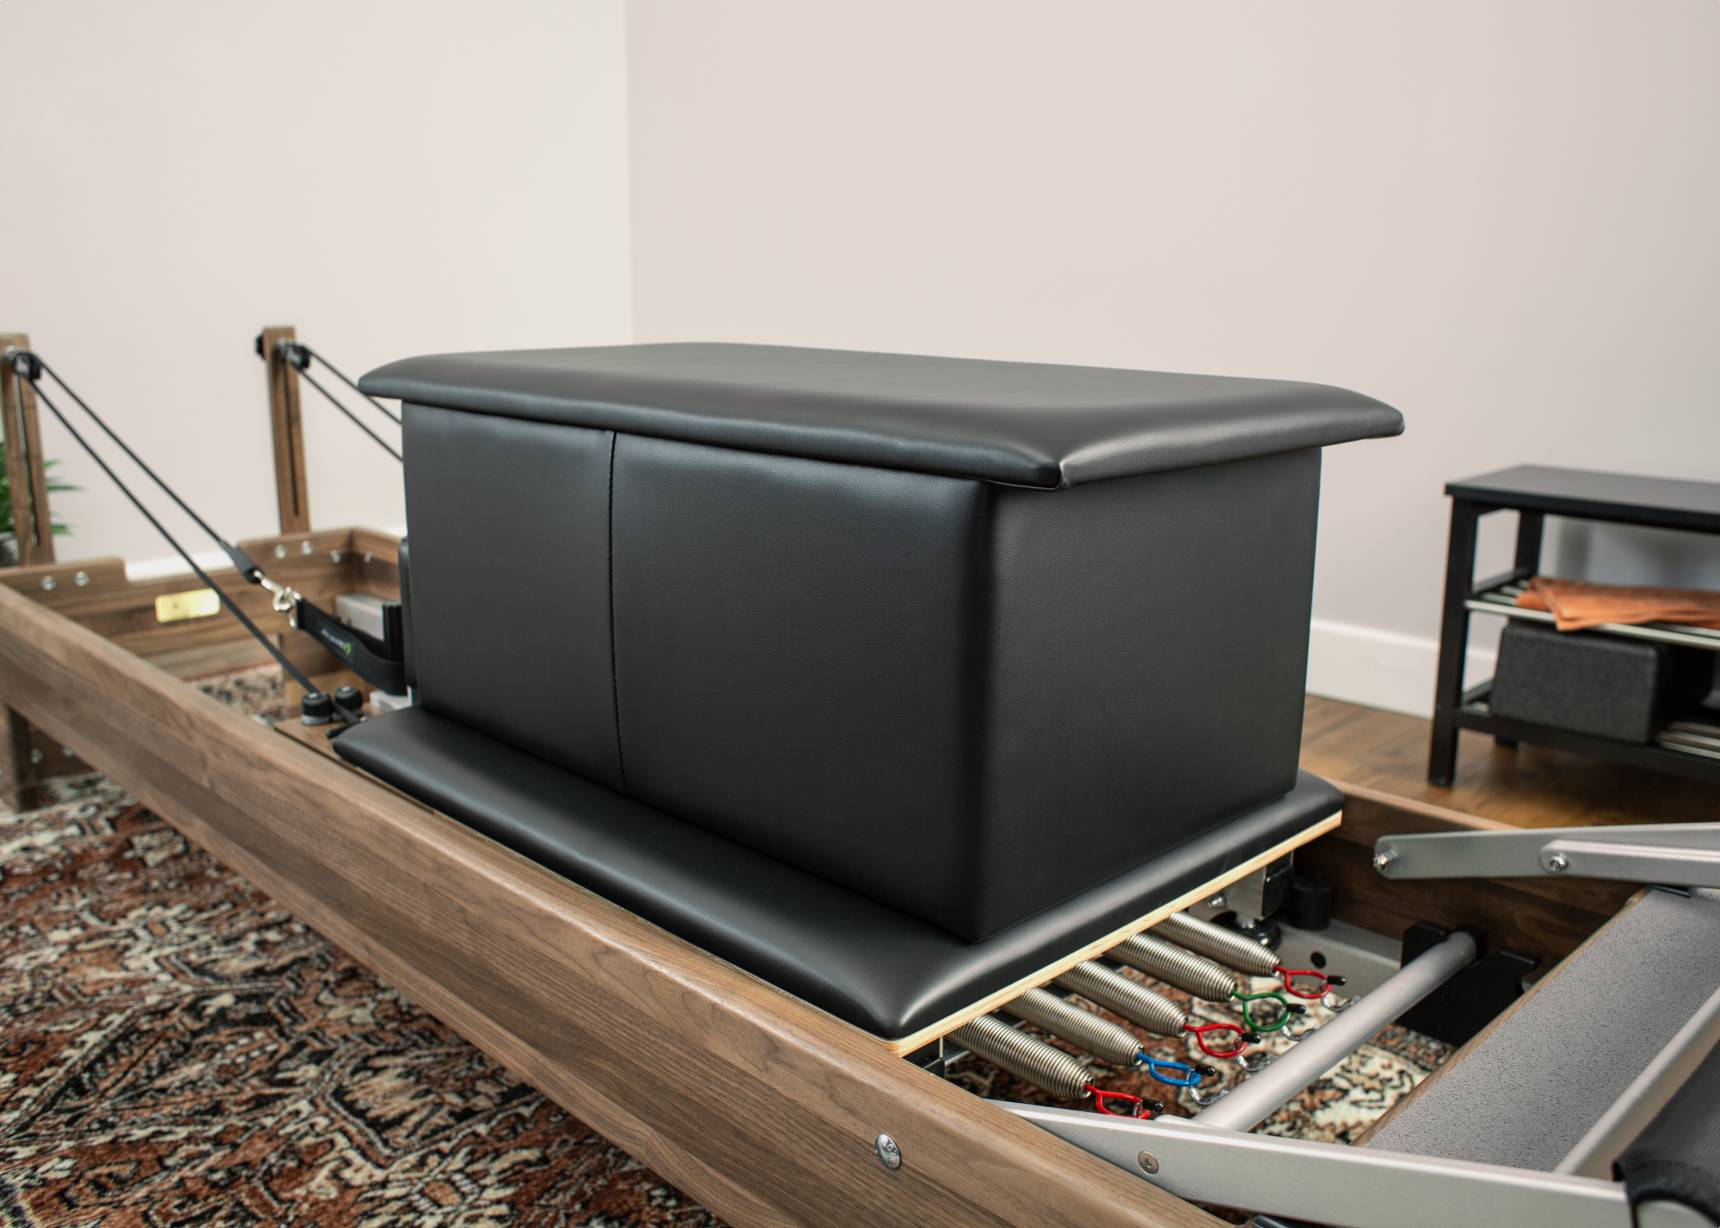 A black large sitting box placed on a reformer, featuring signature springs in the background.